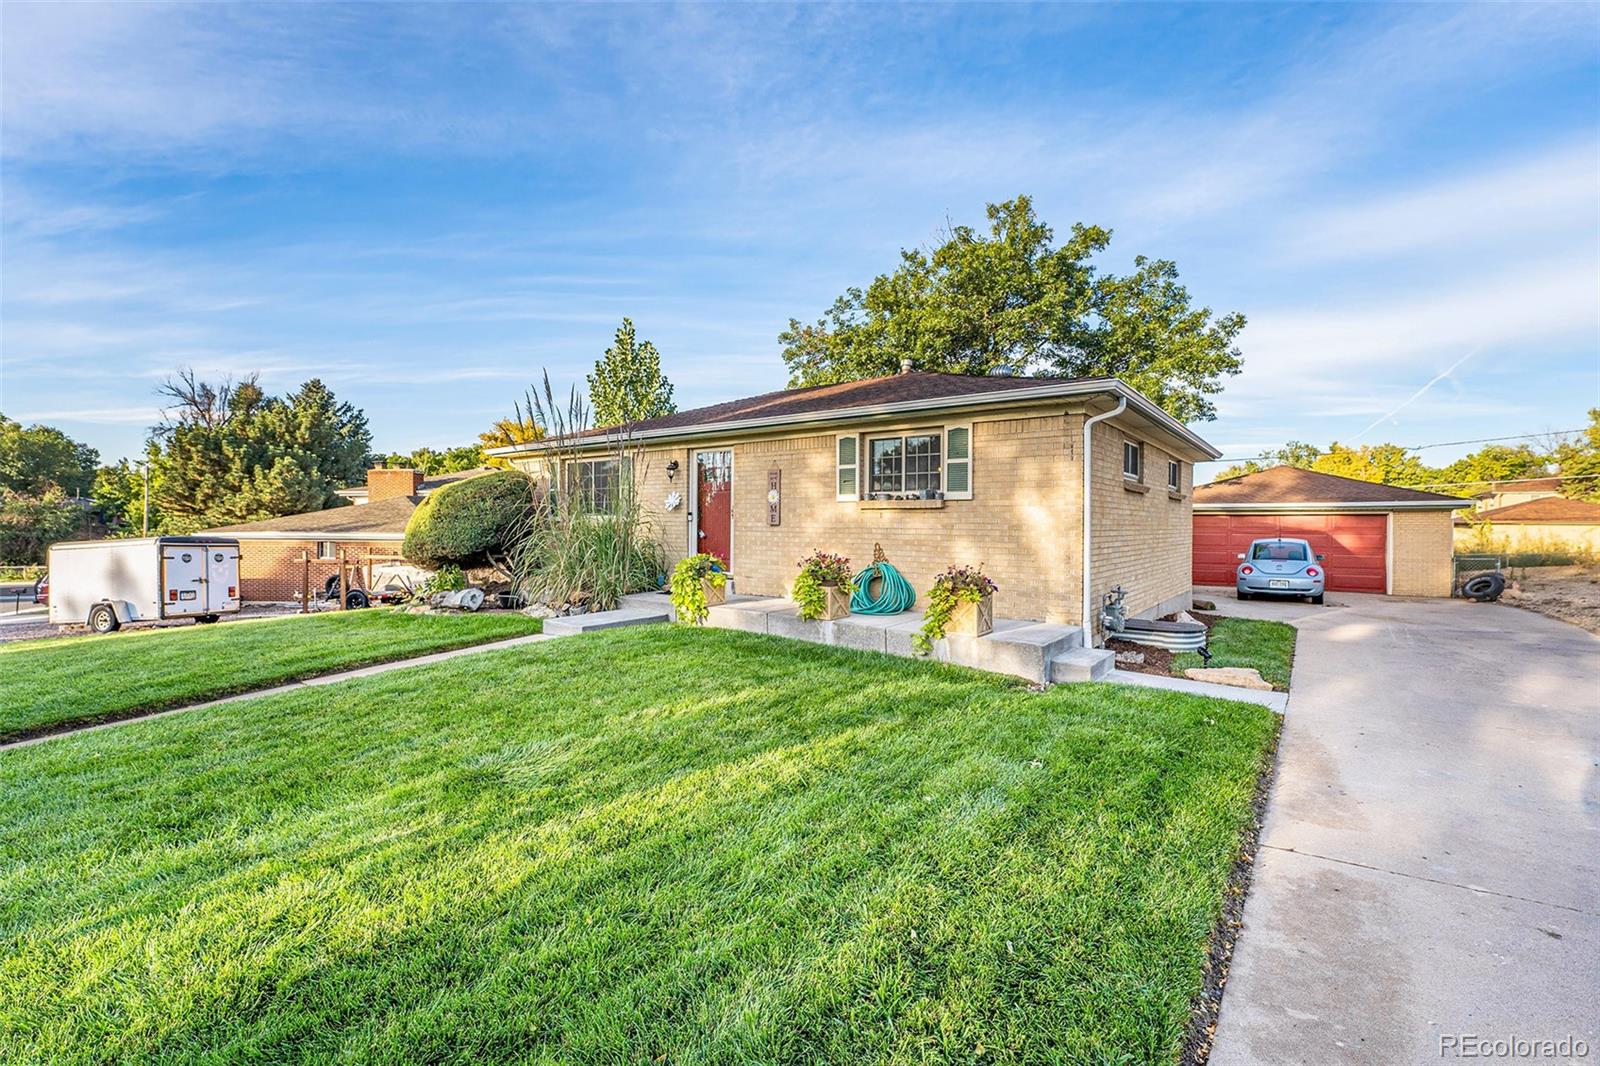 6105  chase street, Arvada sold home. Closed on 2023-12-05 for $550,000.